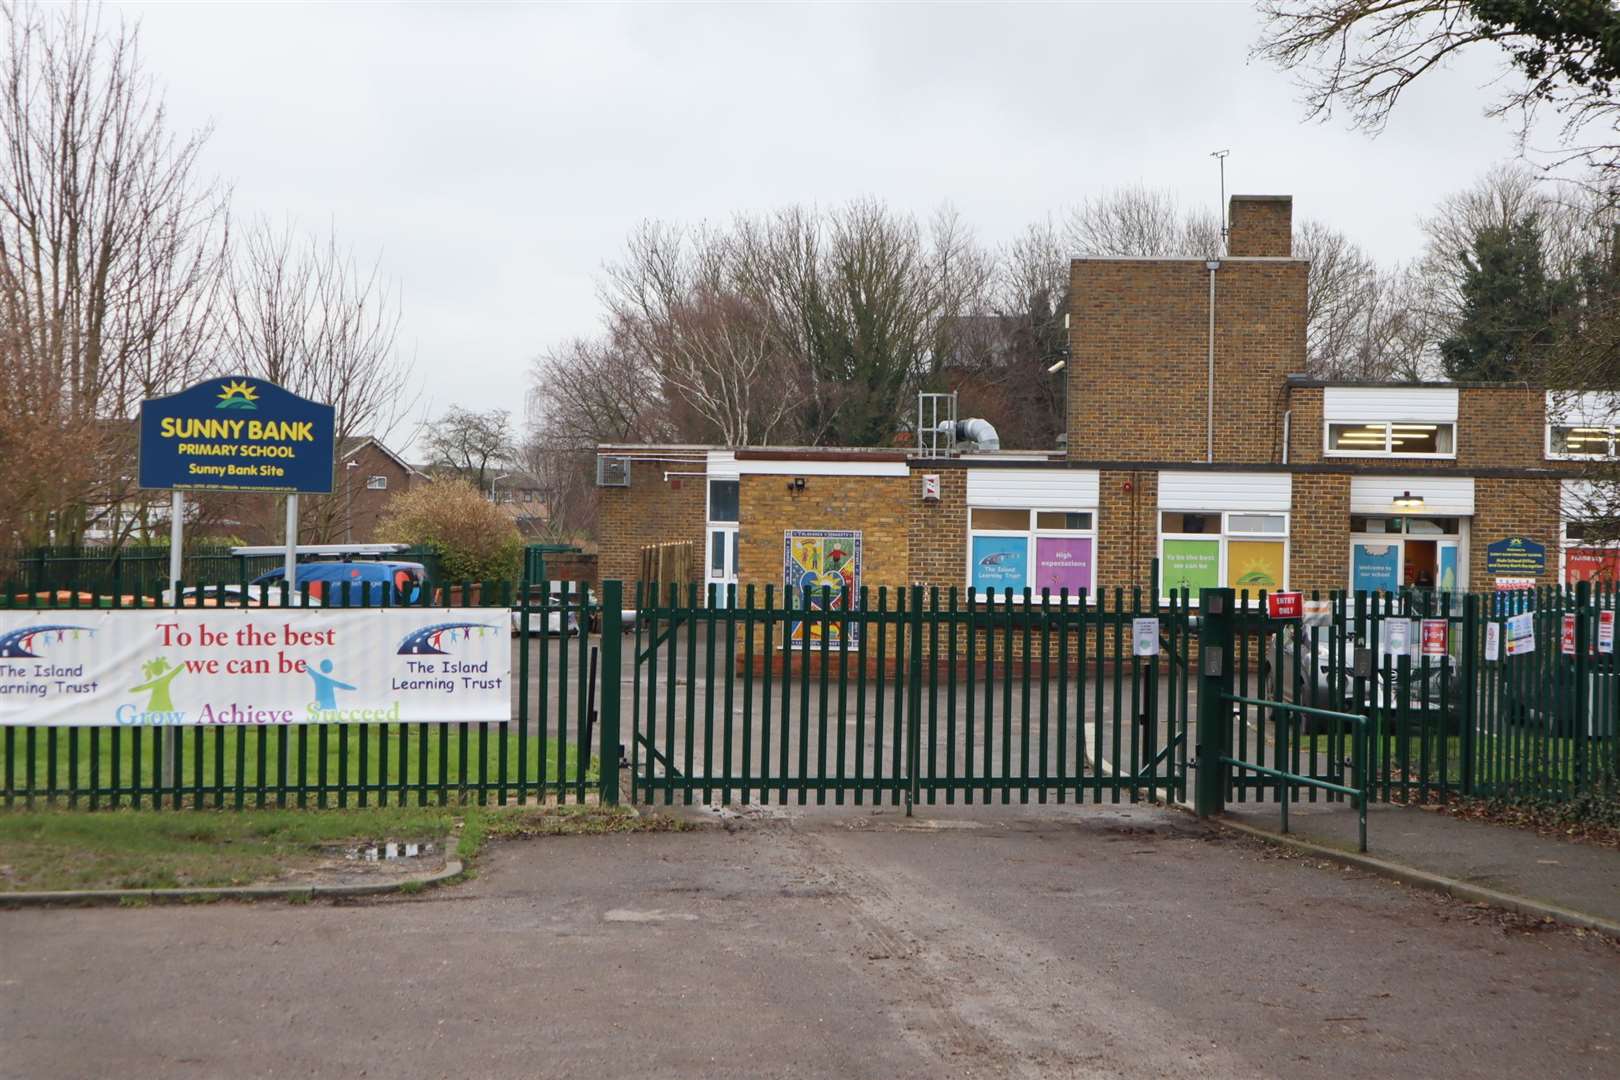 Entrance to Sunny Bank Primary School, Murston